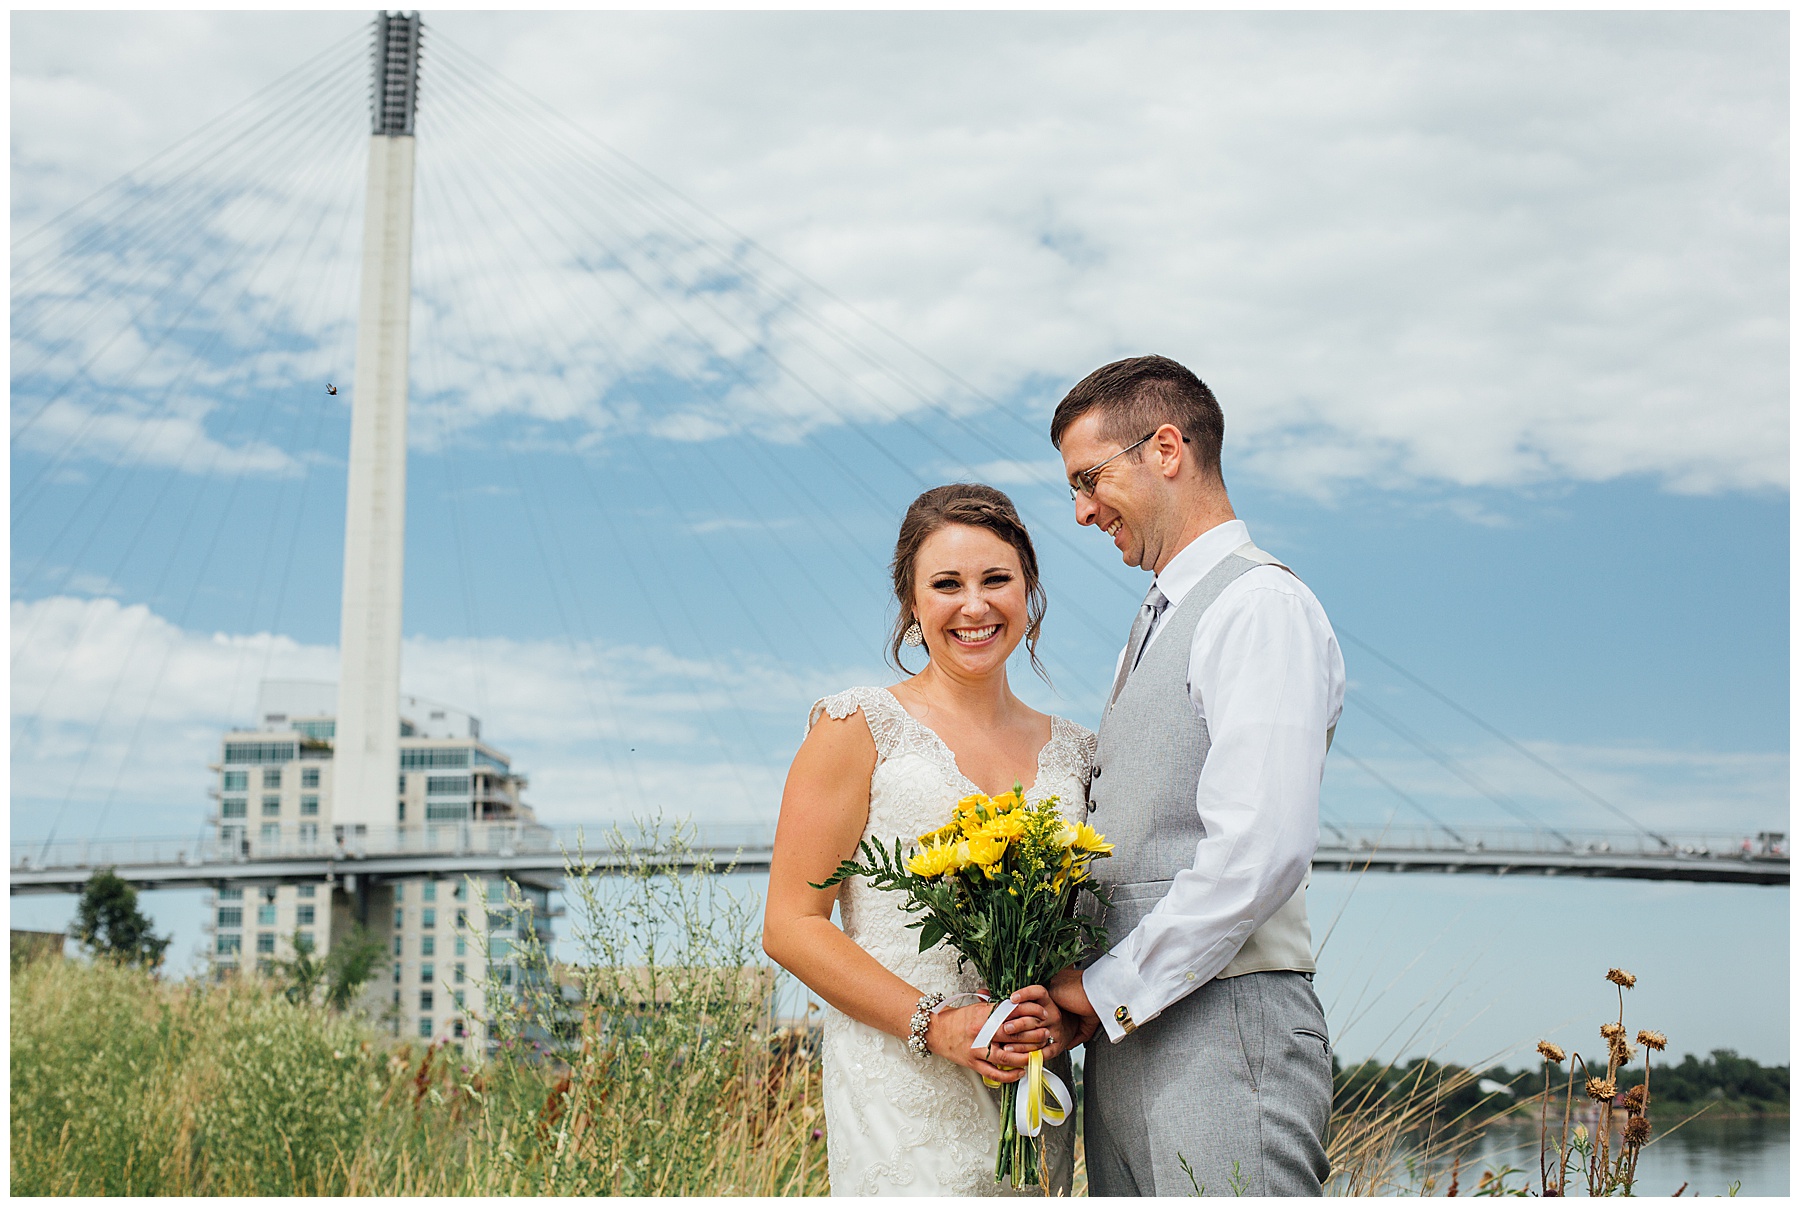 Fontenelle Forest.,Omaha wedding photographer,Small outdoor family wedding at Fontenelle Forest,Andrea Bibeault: a wedding photojournalist specializes in real,photojournalistic wedding photography. Based in Omaha,we travel all over the midwest and country.,